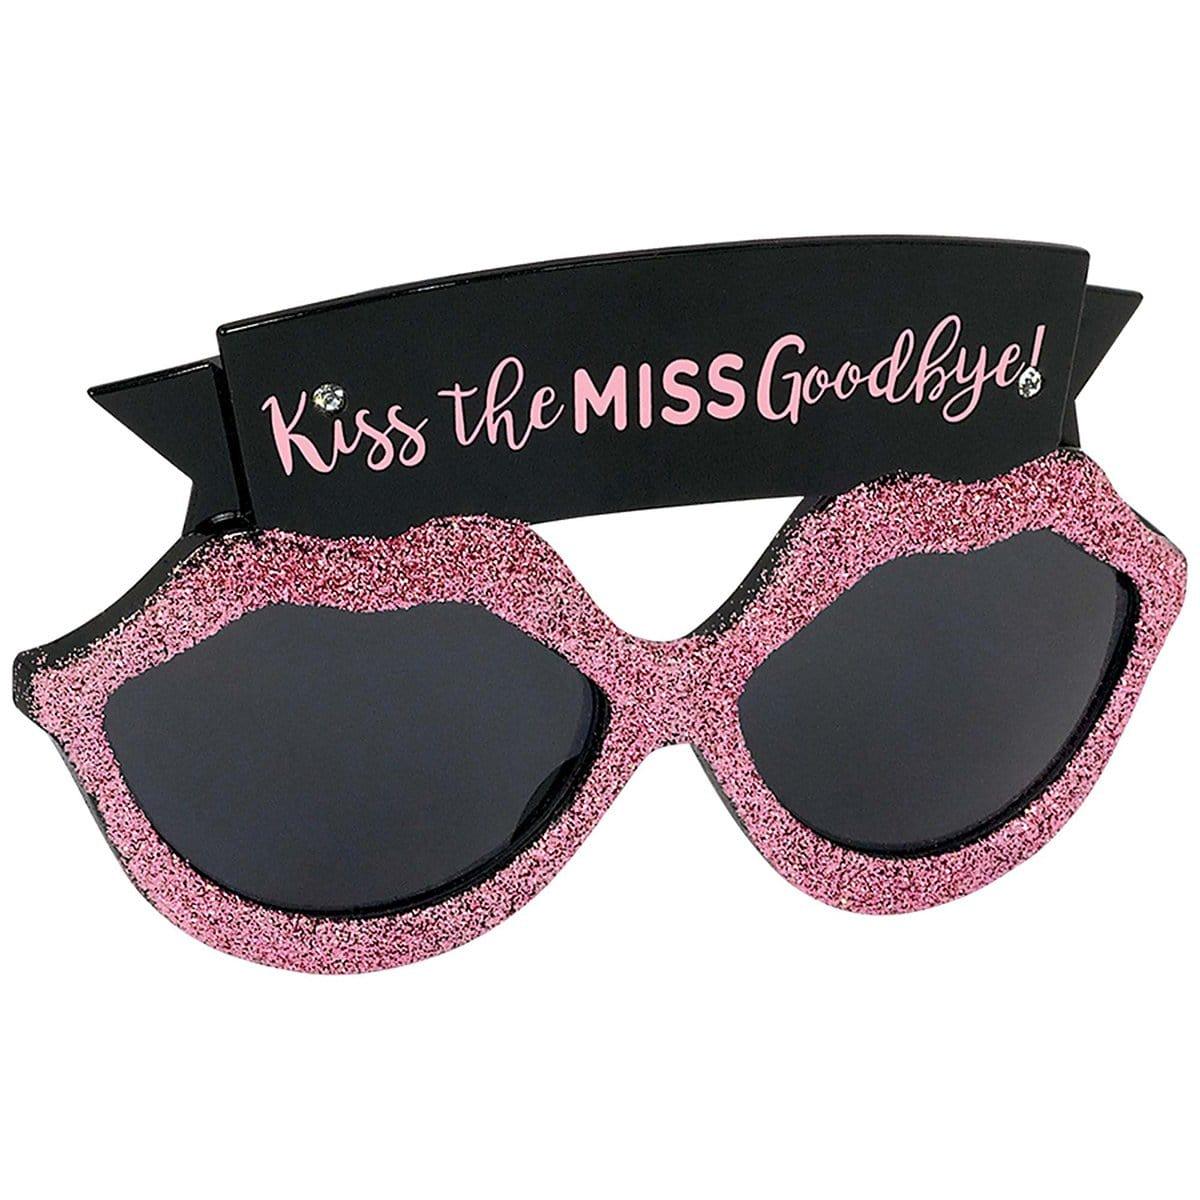 Buy Bachelorette Pink glitter Kiss the Miss Goodbye! glasses sold at Party Expert